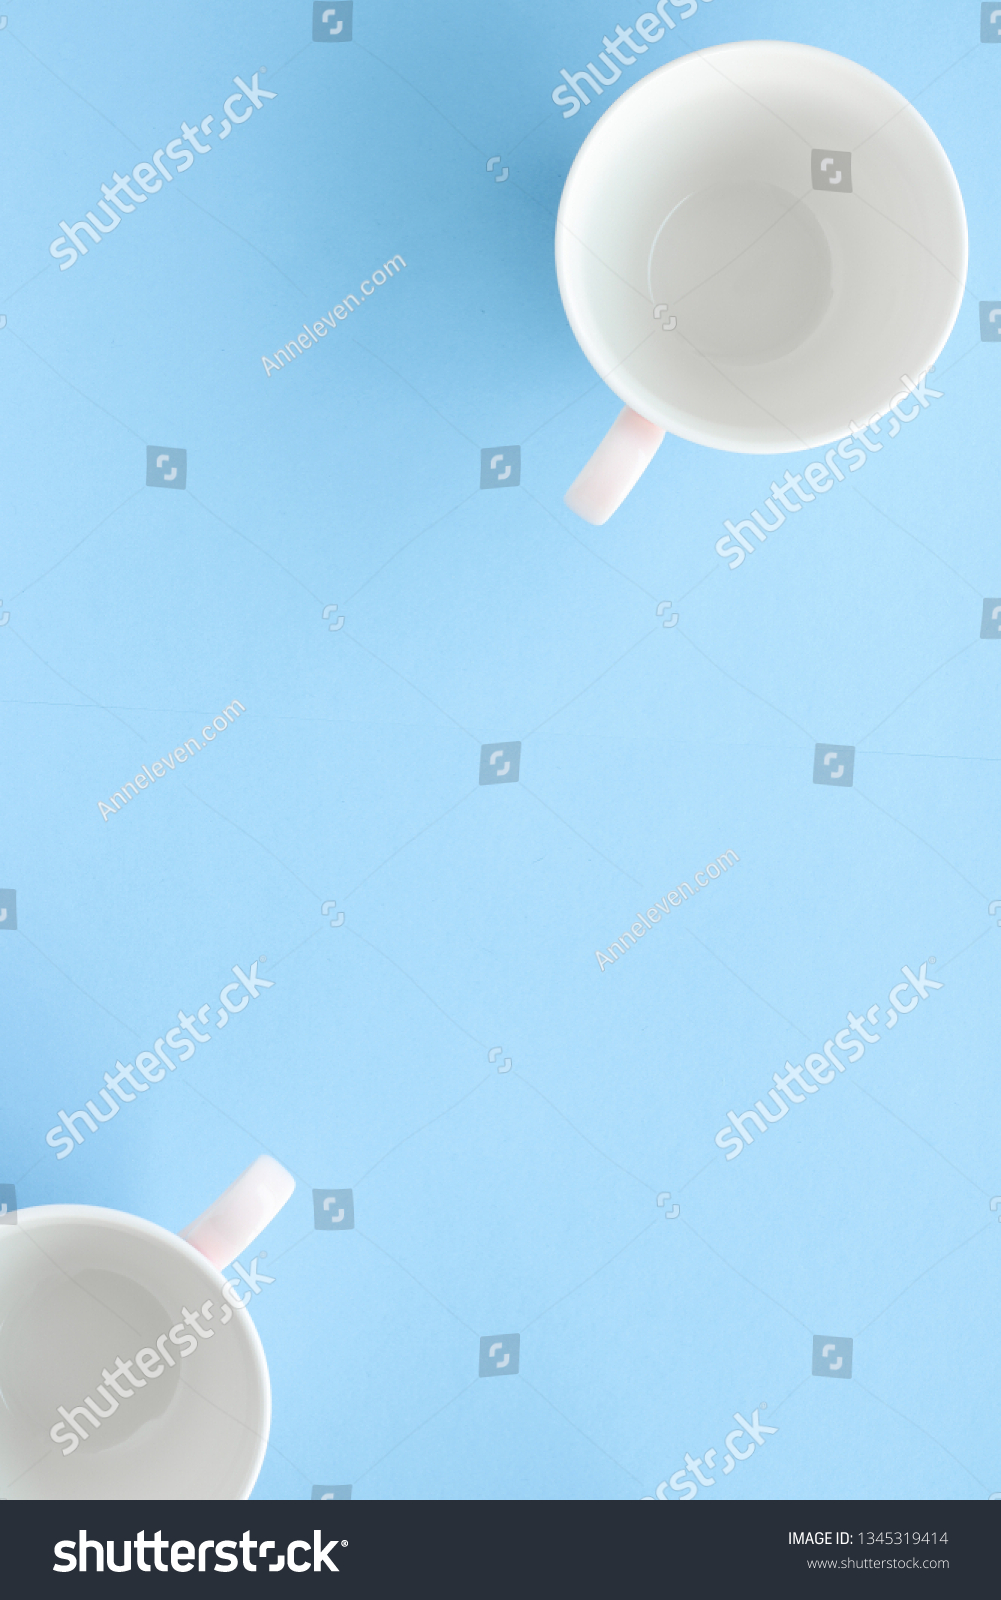 Kitchen, dishware and drinks concept - Empty cup and saucer on blue background, flatlay #1345319414